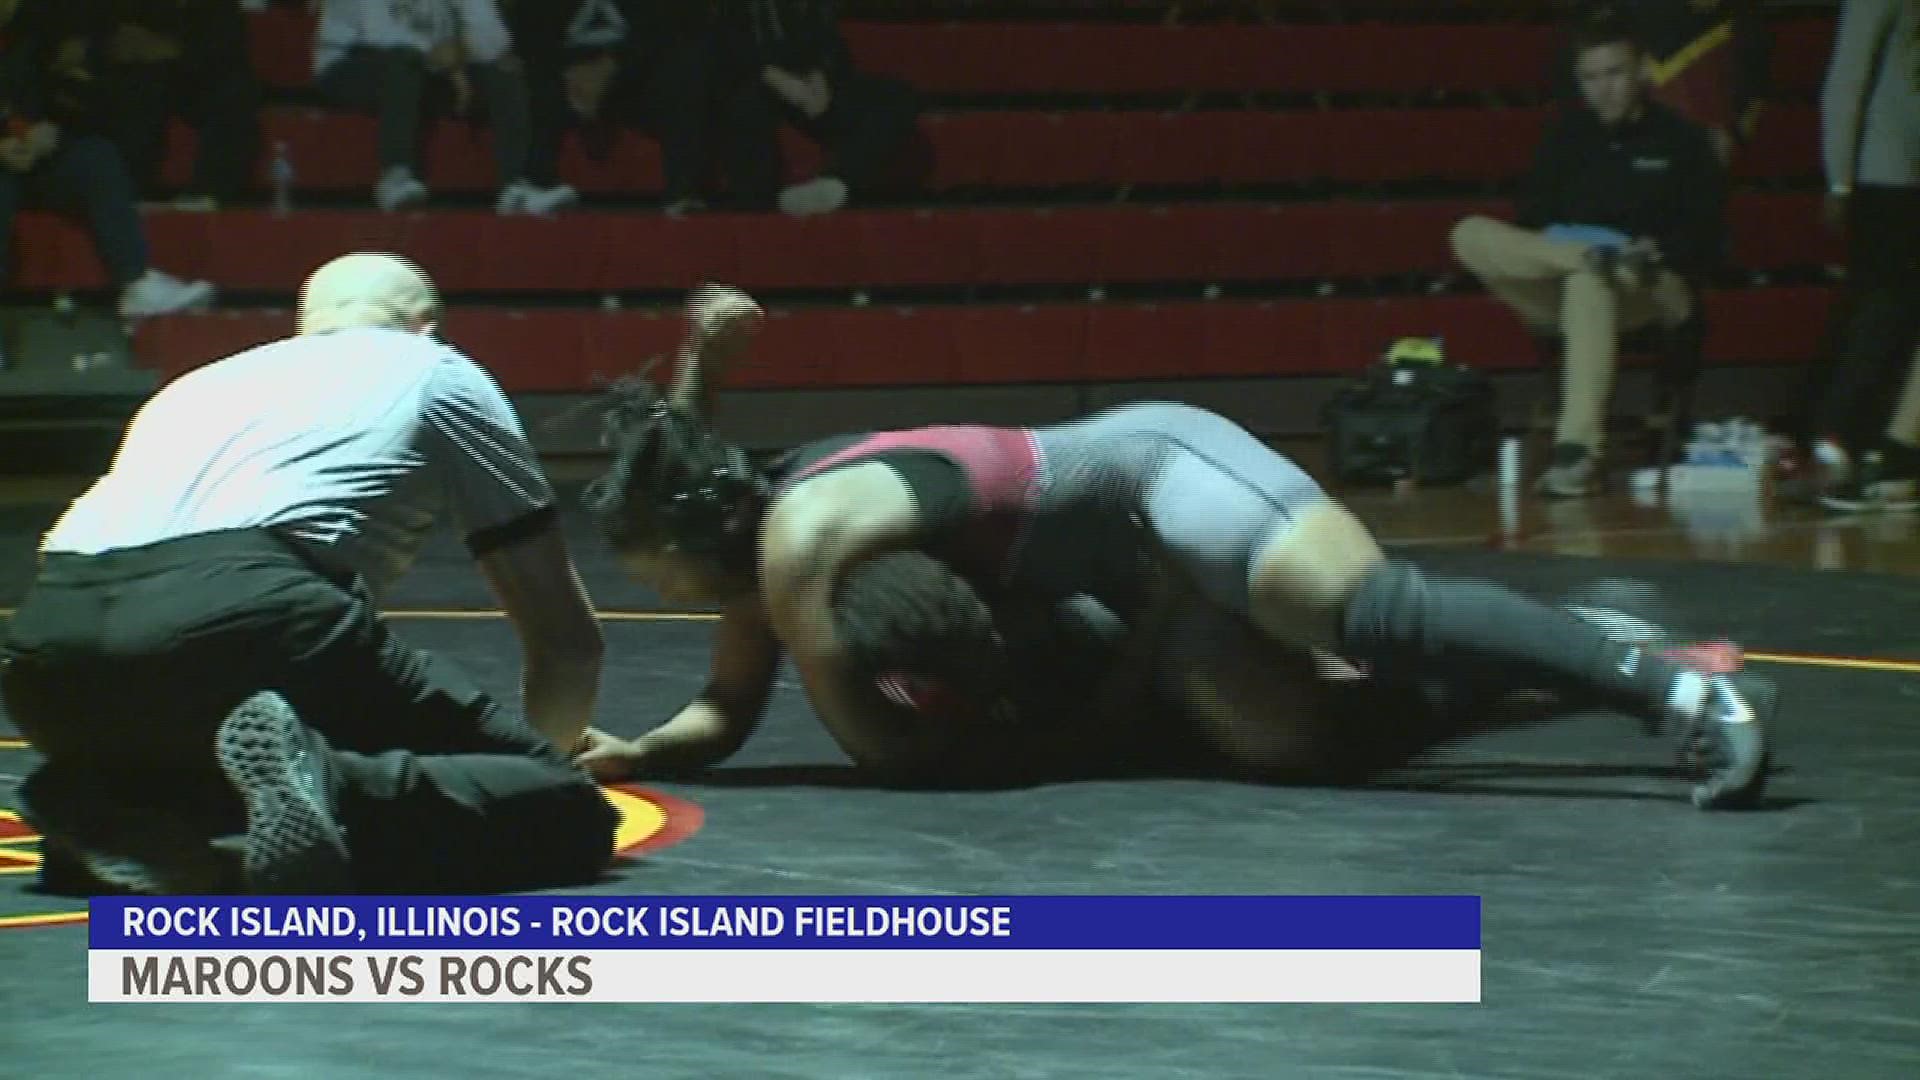 What better way to start off conference action than with a classic rivalry match between Moline and Rock Island?